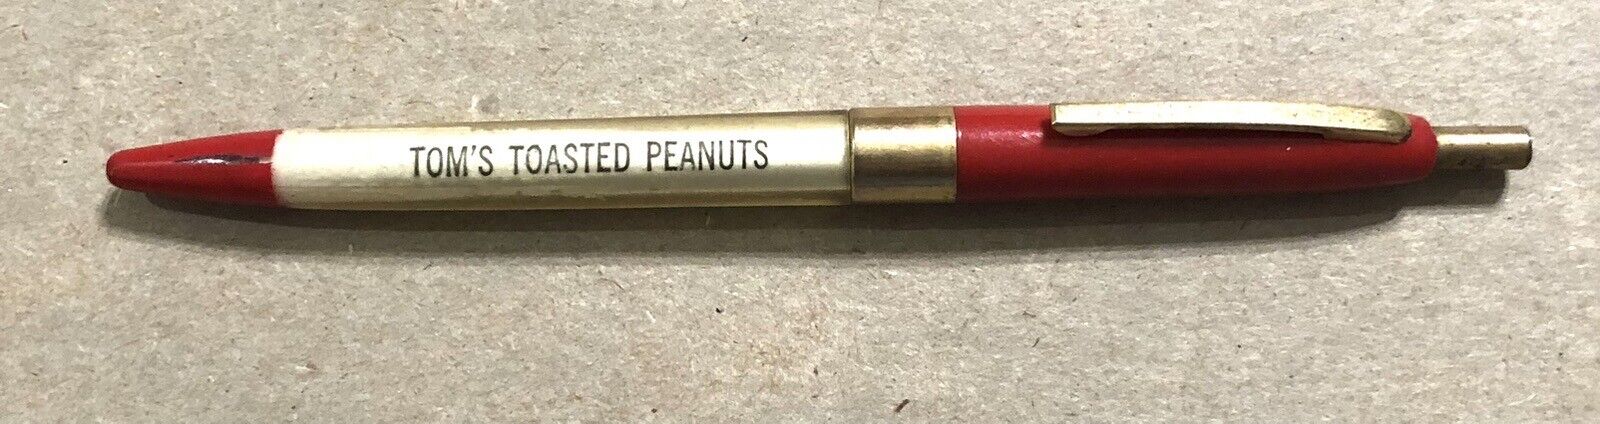 Vintage Tom’s Toasted Peanuts Butter Sandwiches Candies Potato Chips Ad Pen